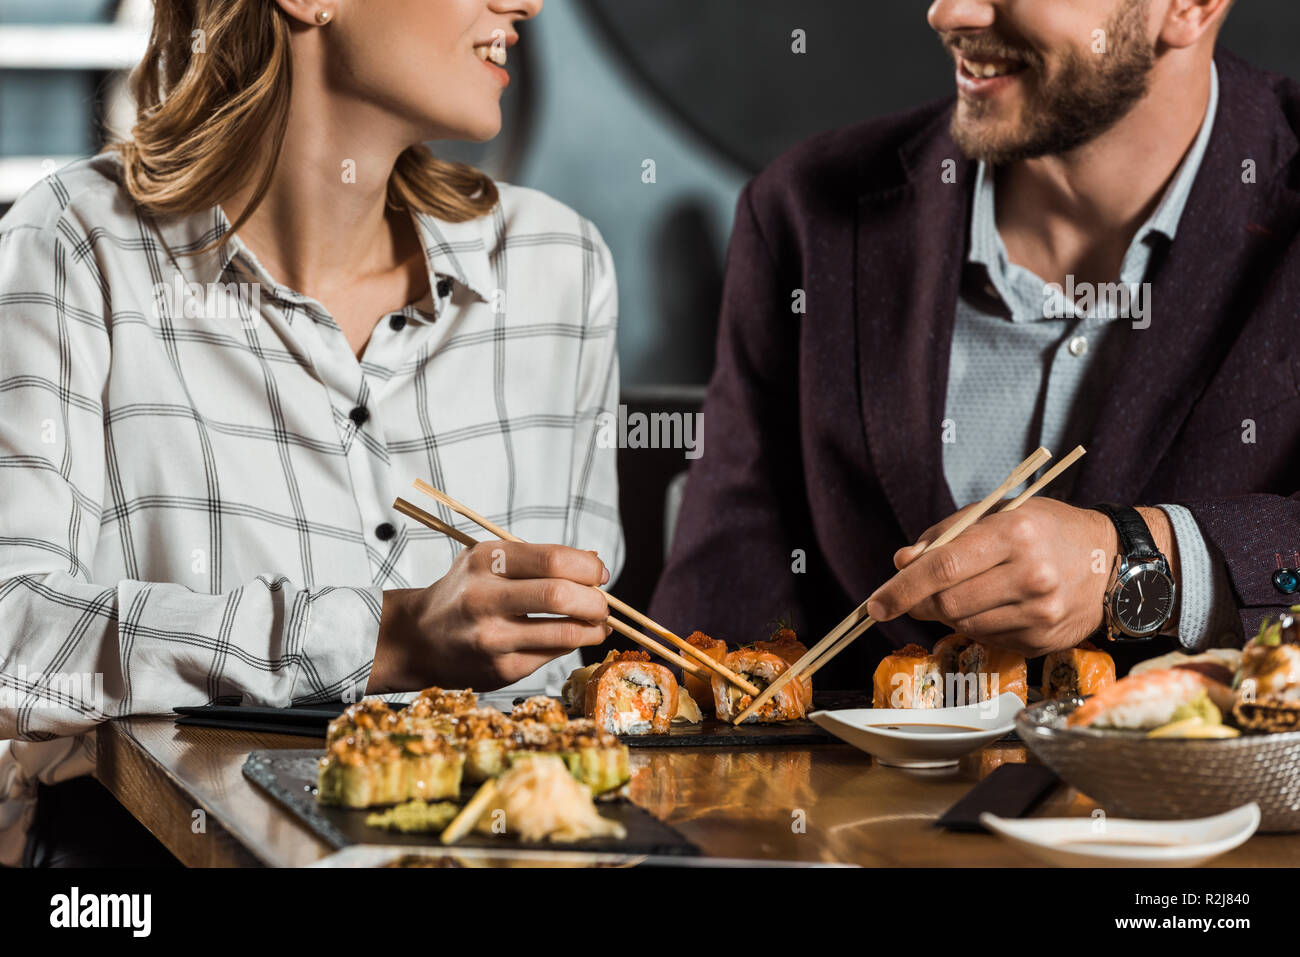 Partial view of smiling couple eating sushi in restaurant Stock Photo